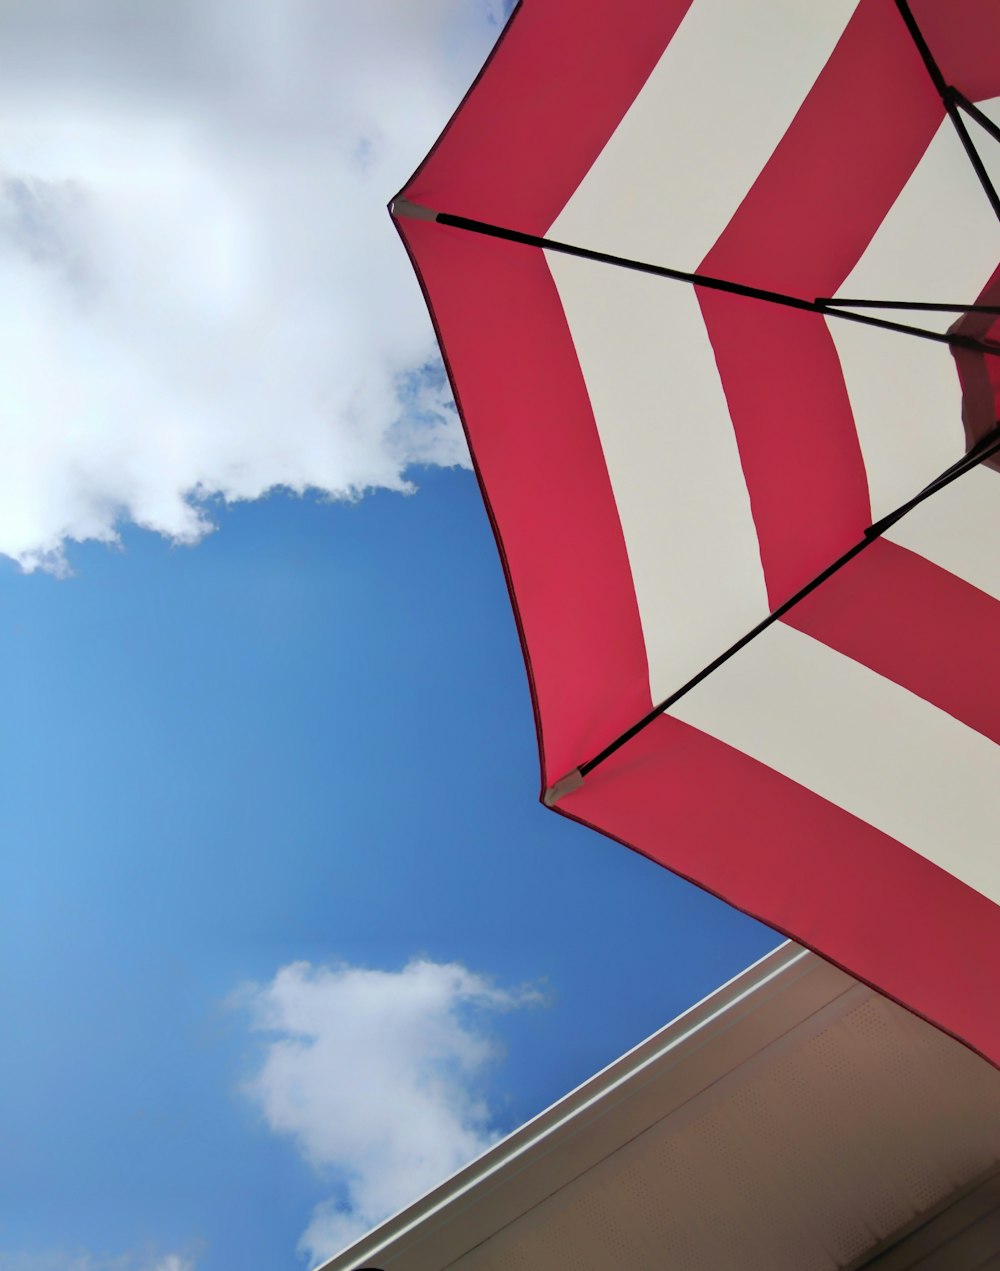 low angle photography of red and white umbrella